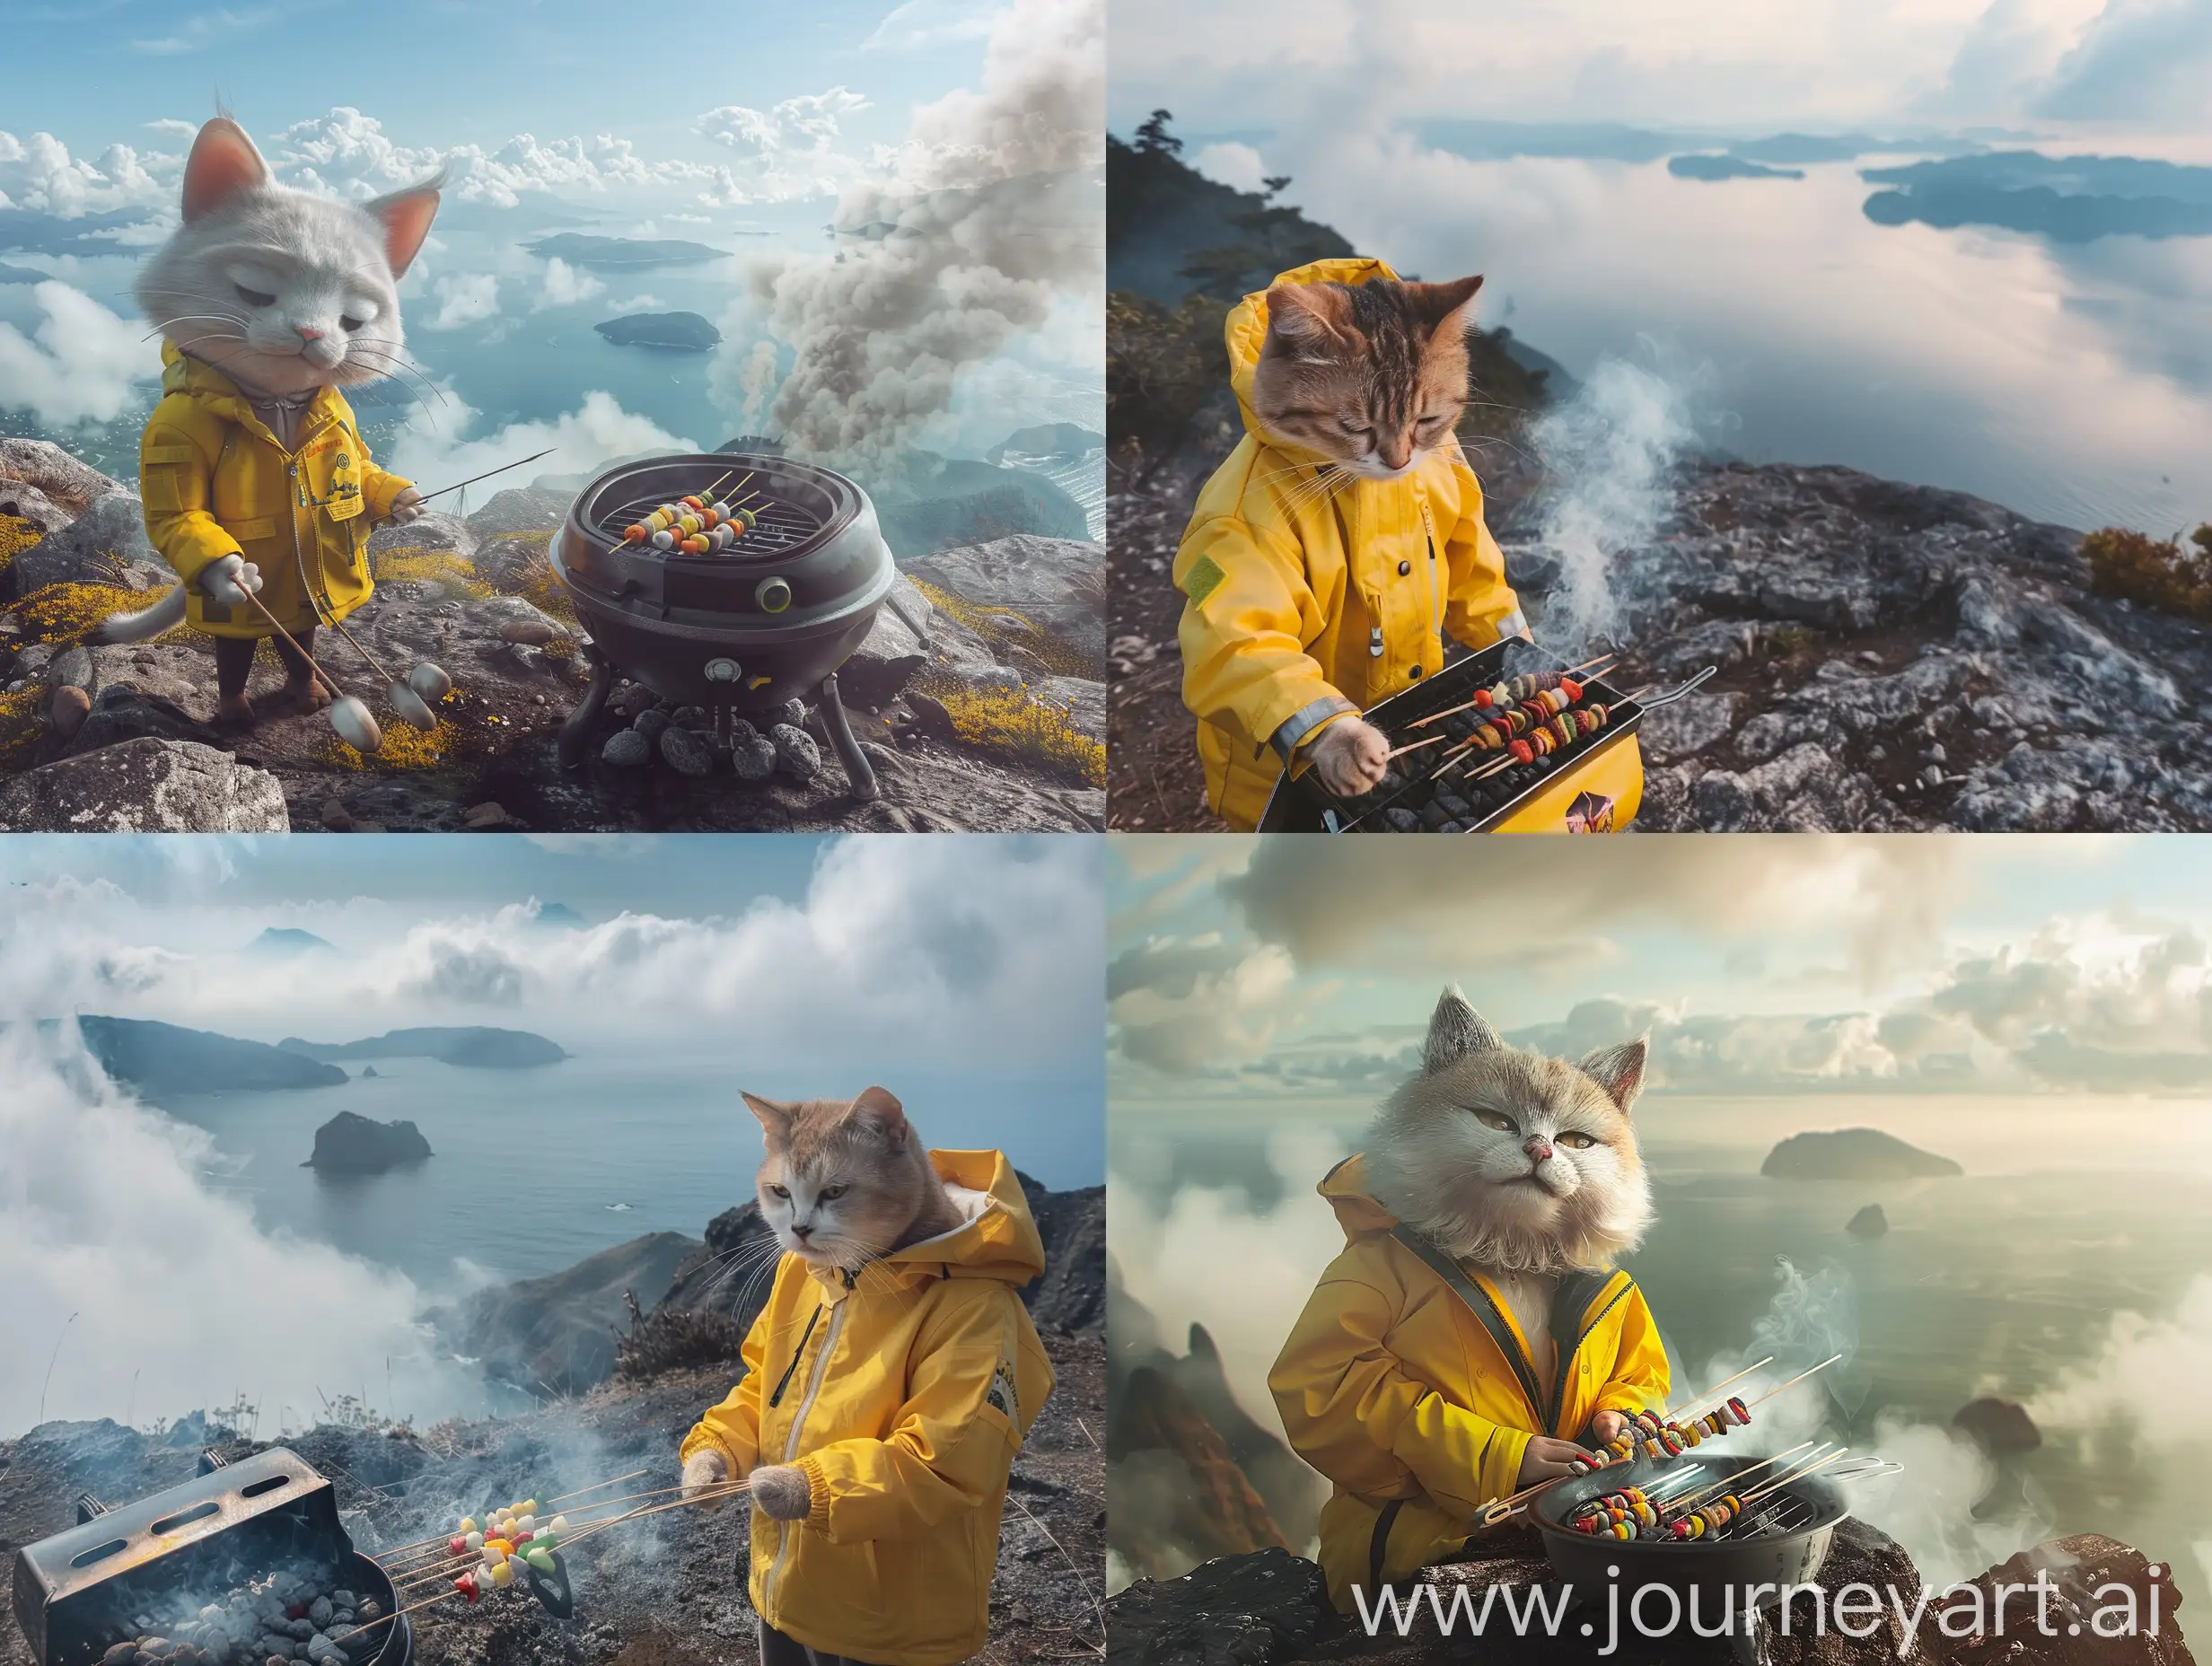 Adorable-Cat-in-Yellow-Outdoor-Jacket-Grilling-Skewers-atop-Mountain-with-Scenic-Sea-View